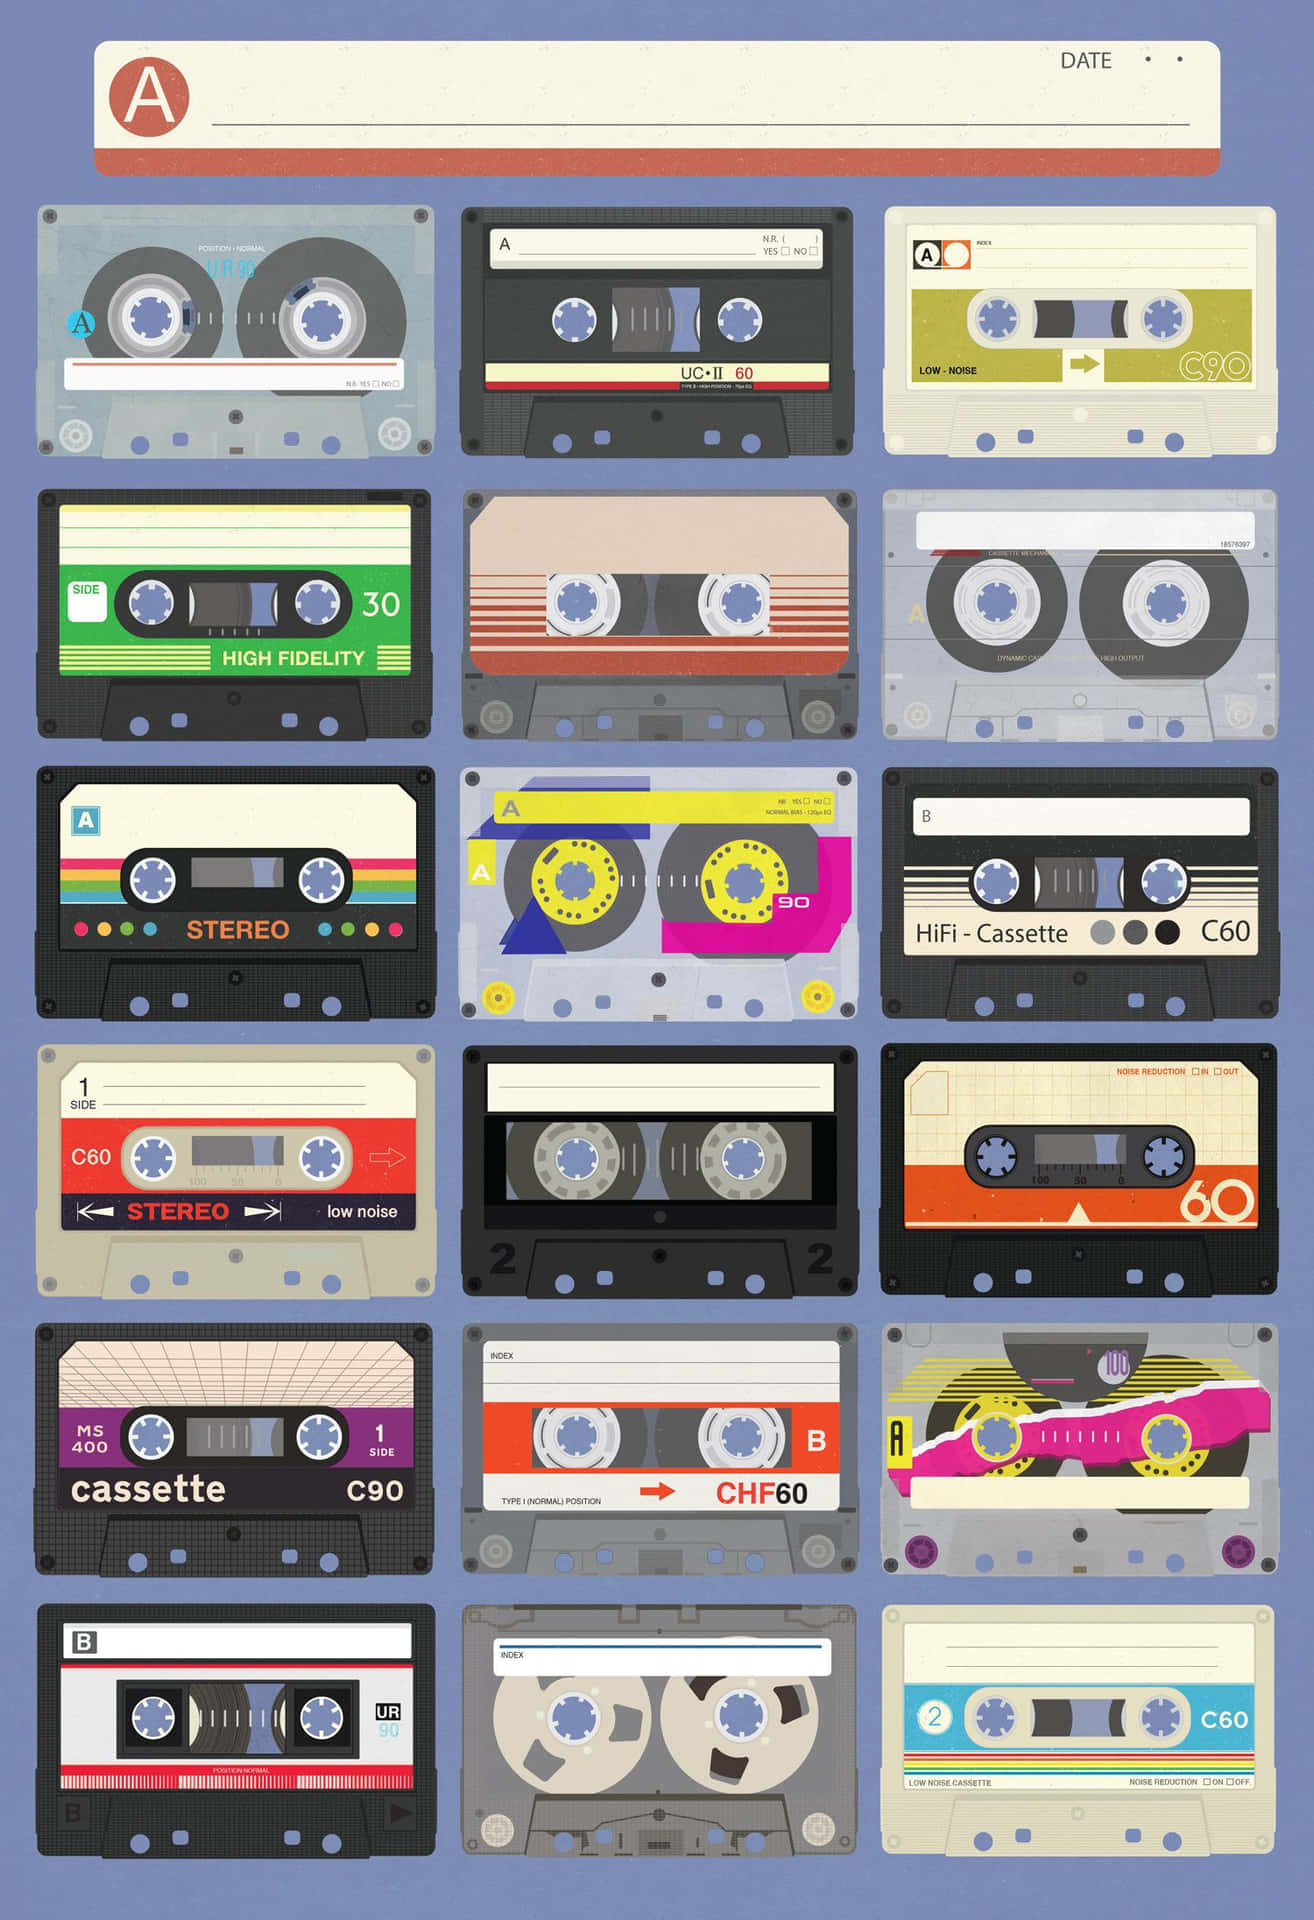 Get creative with your own mixtape!